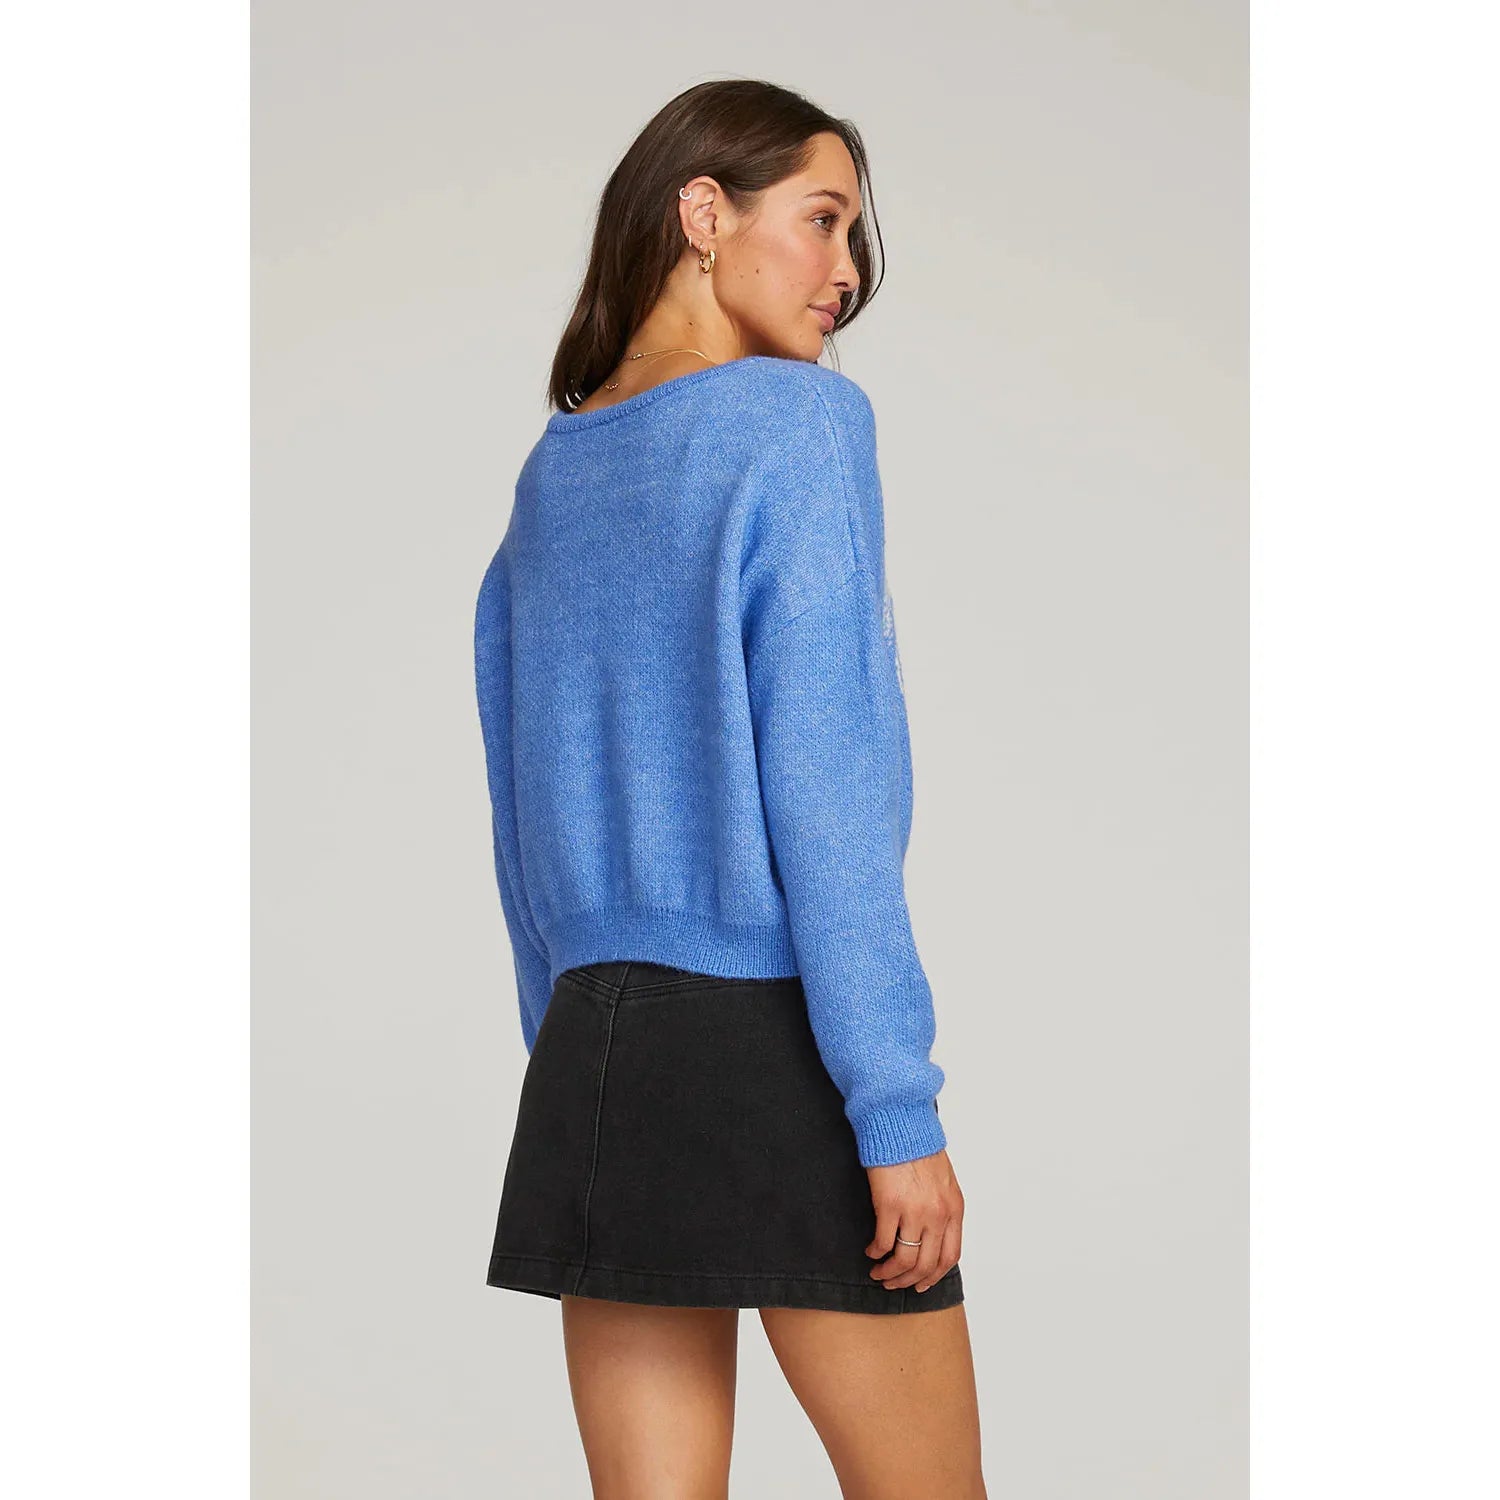 Saltwater Luxe - Ganna Sweater in Pacific